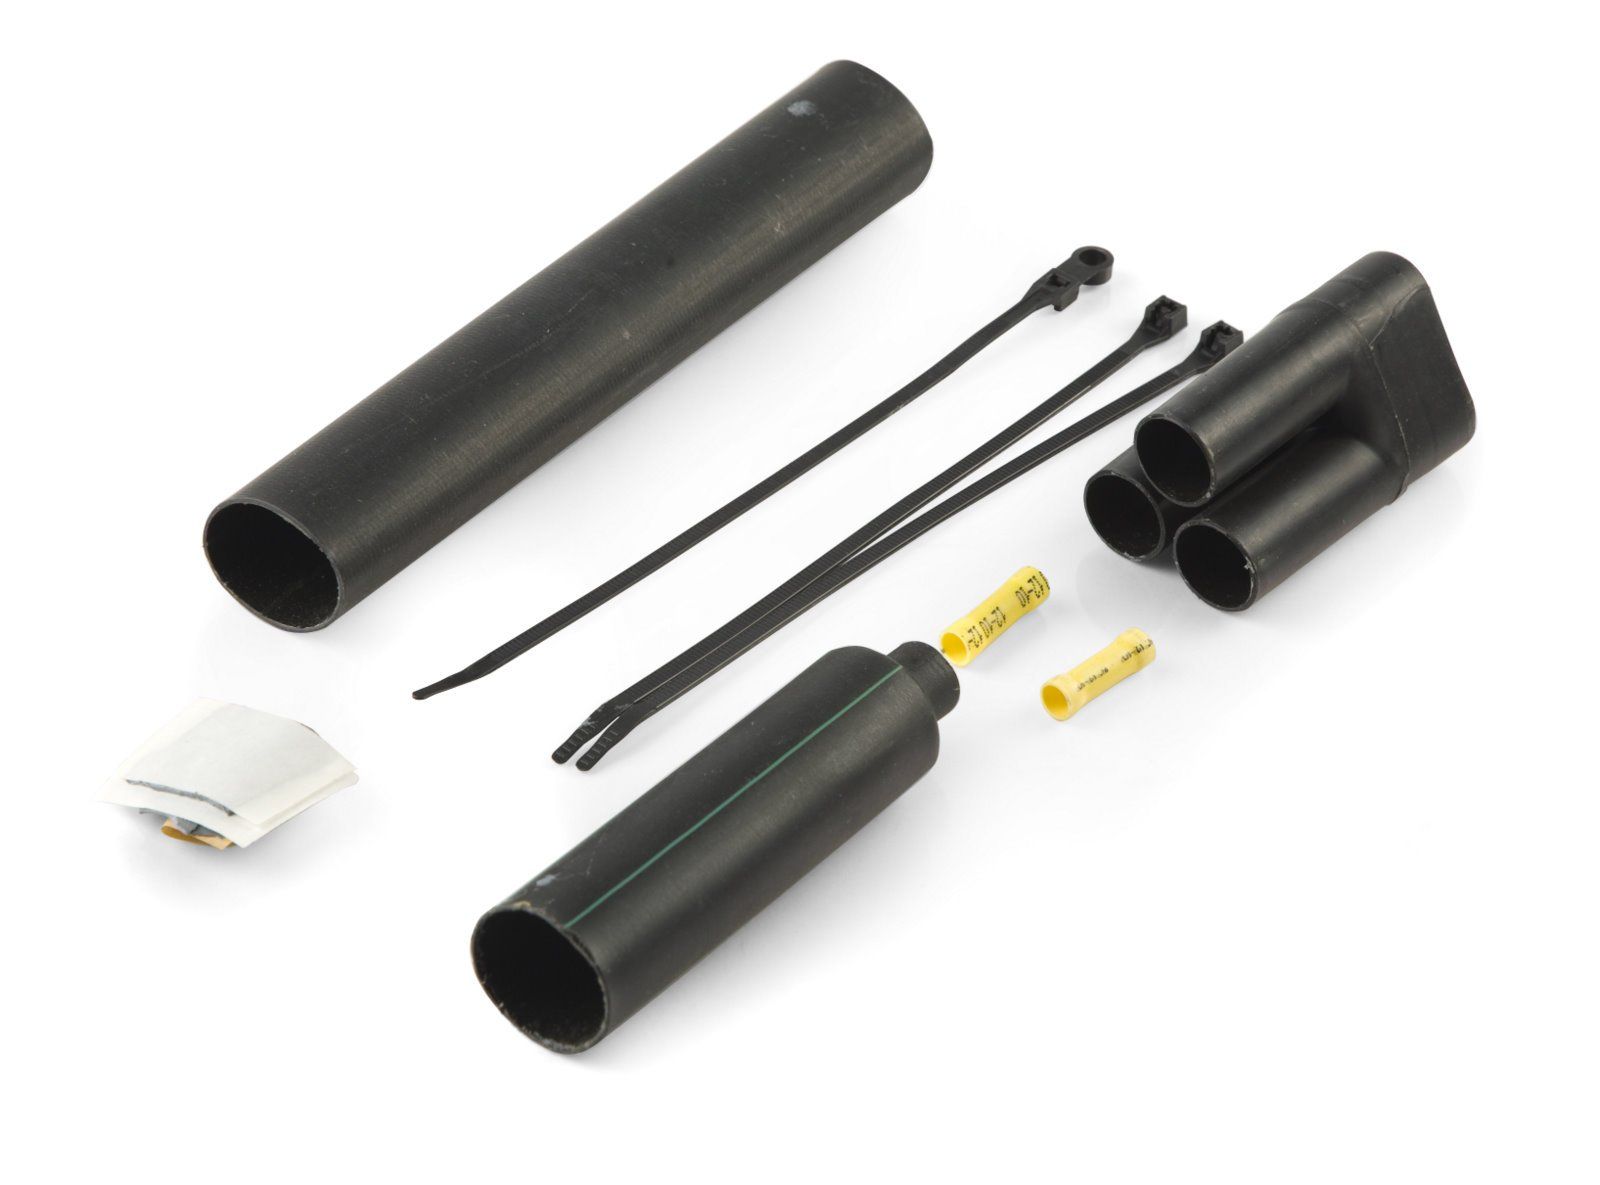 Roof Deicing System - Heat Shrink Kits